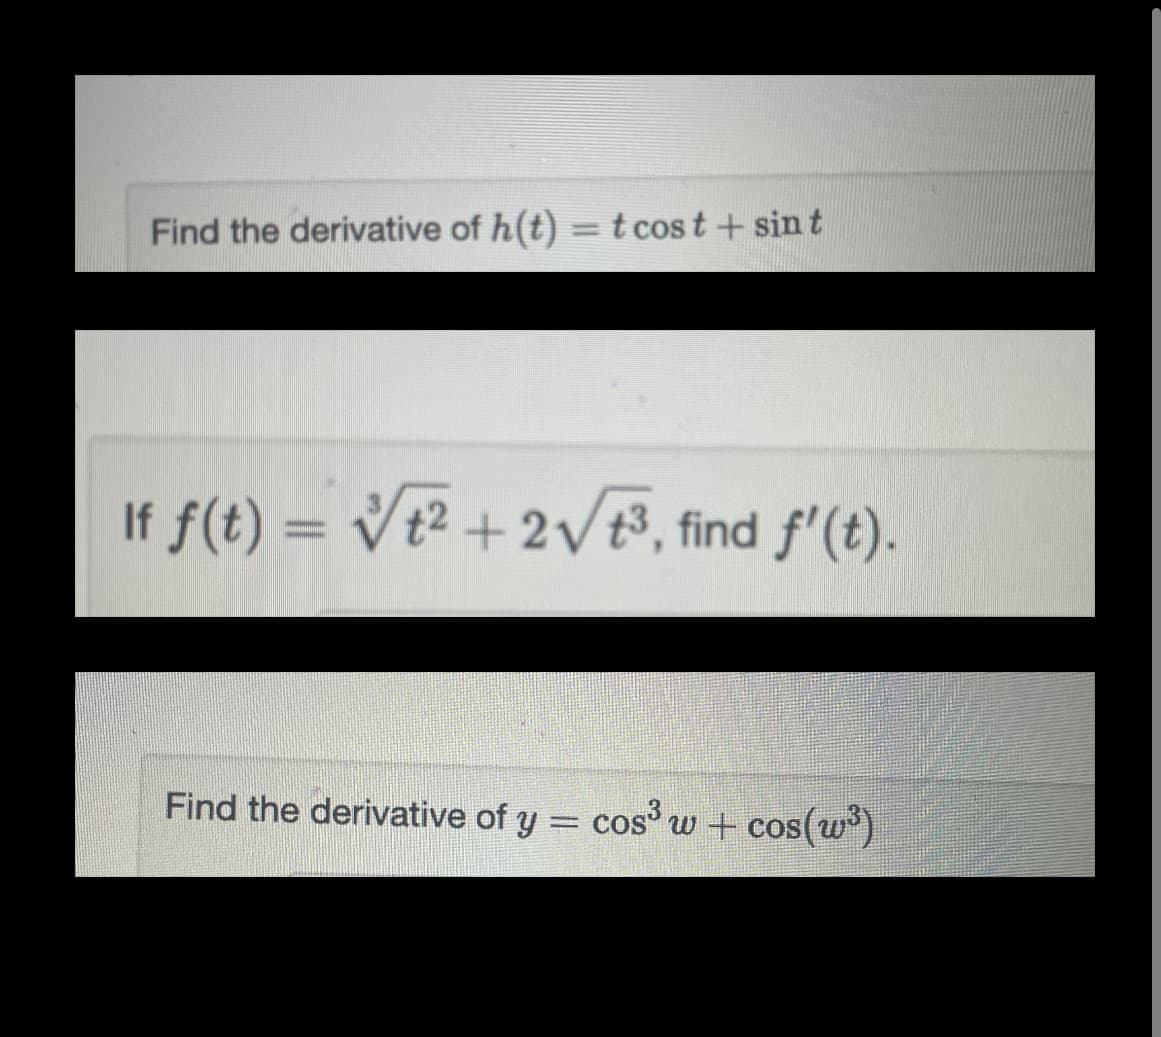 Find the derivative of h(t) = t cost + sint
If f(t) = √√/t² + 2√√/t³, find f'(t).
Find the derivative of y = cos³ w + cos(³)